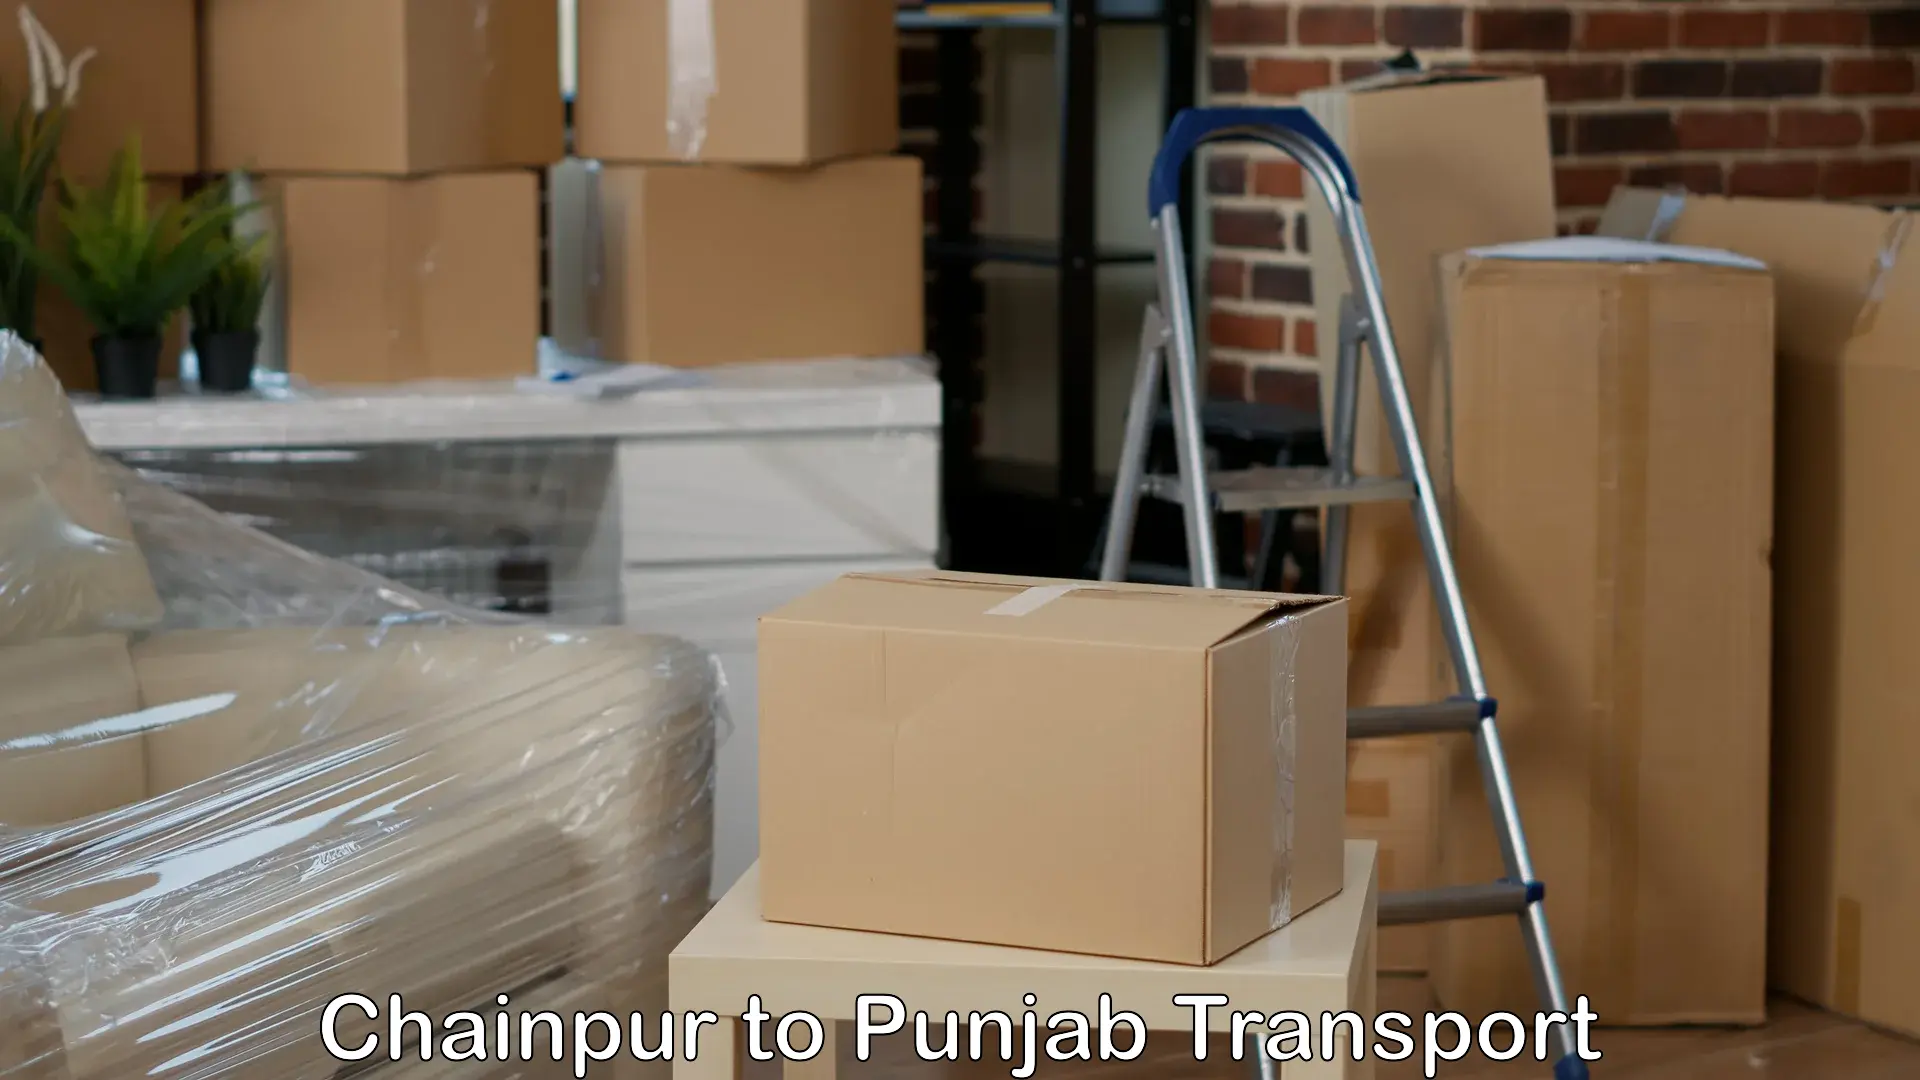 All India transport service Chainpur to Faridkot